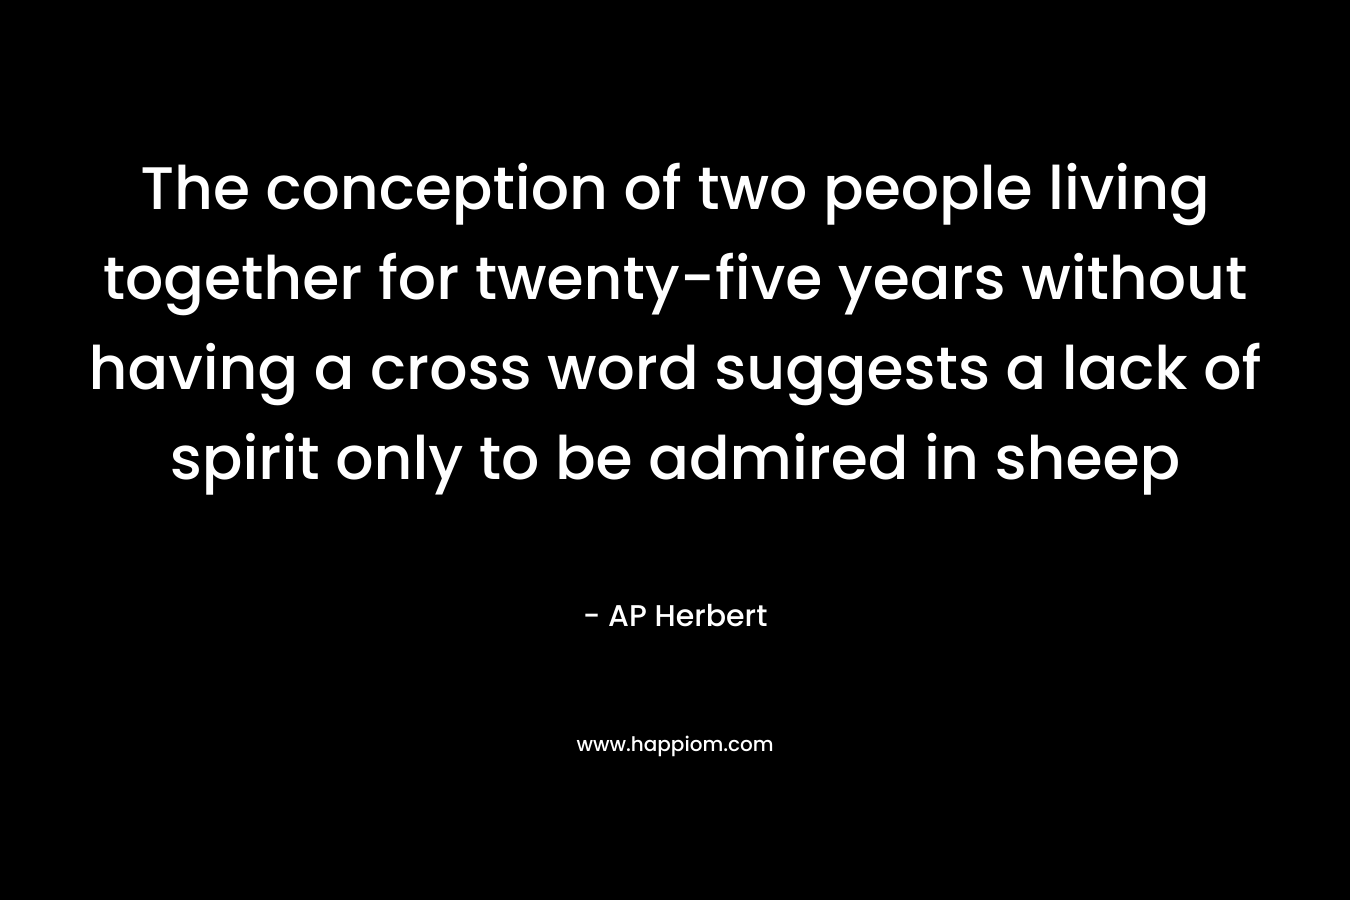 The conception of two people living together for twenty-five years without having a cross word suggests a lack of spirit only to be admired in sheep – AP Herbert